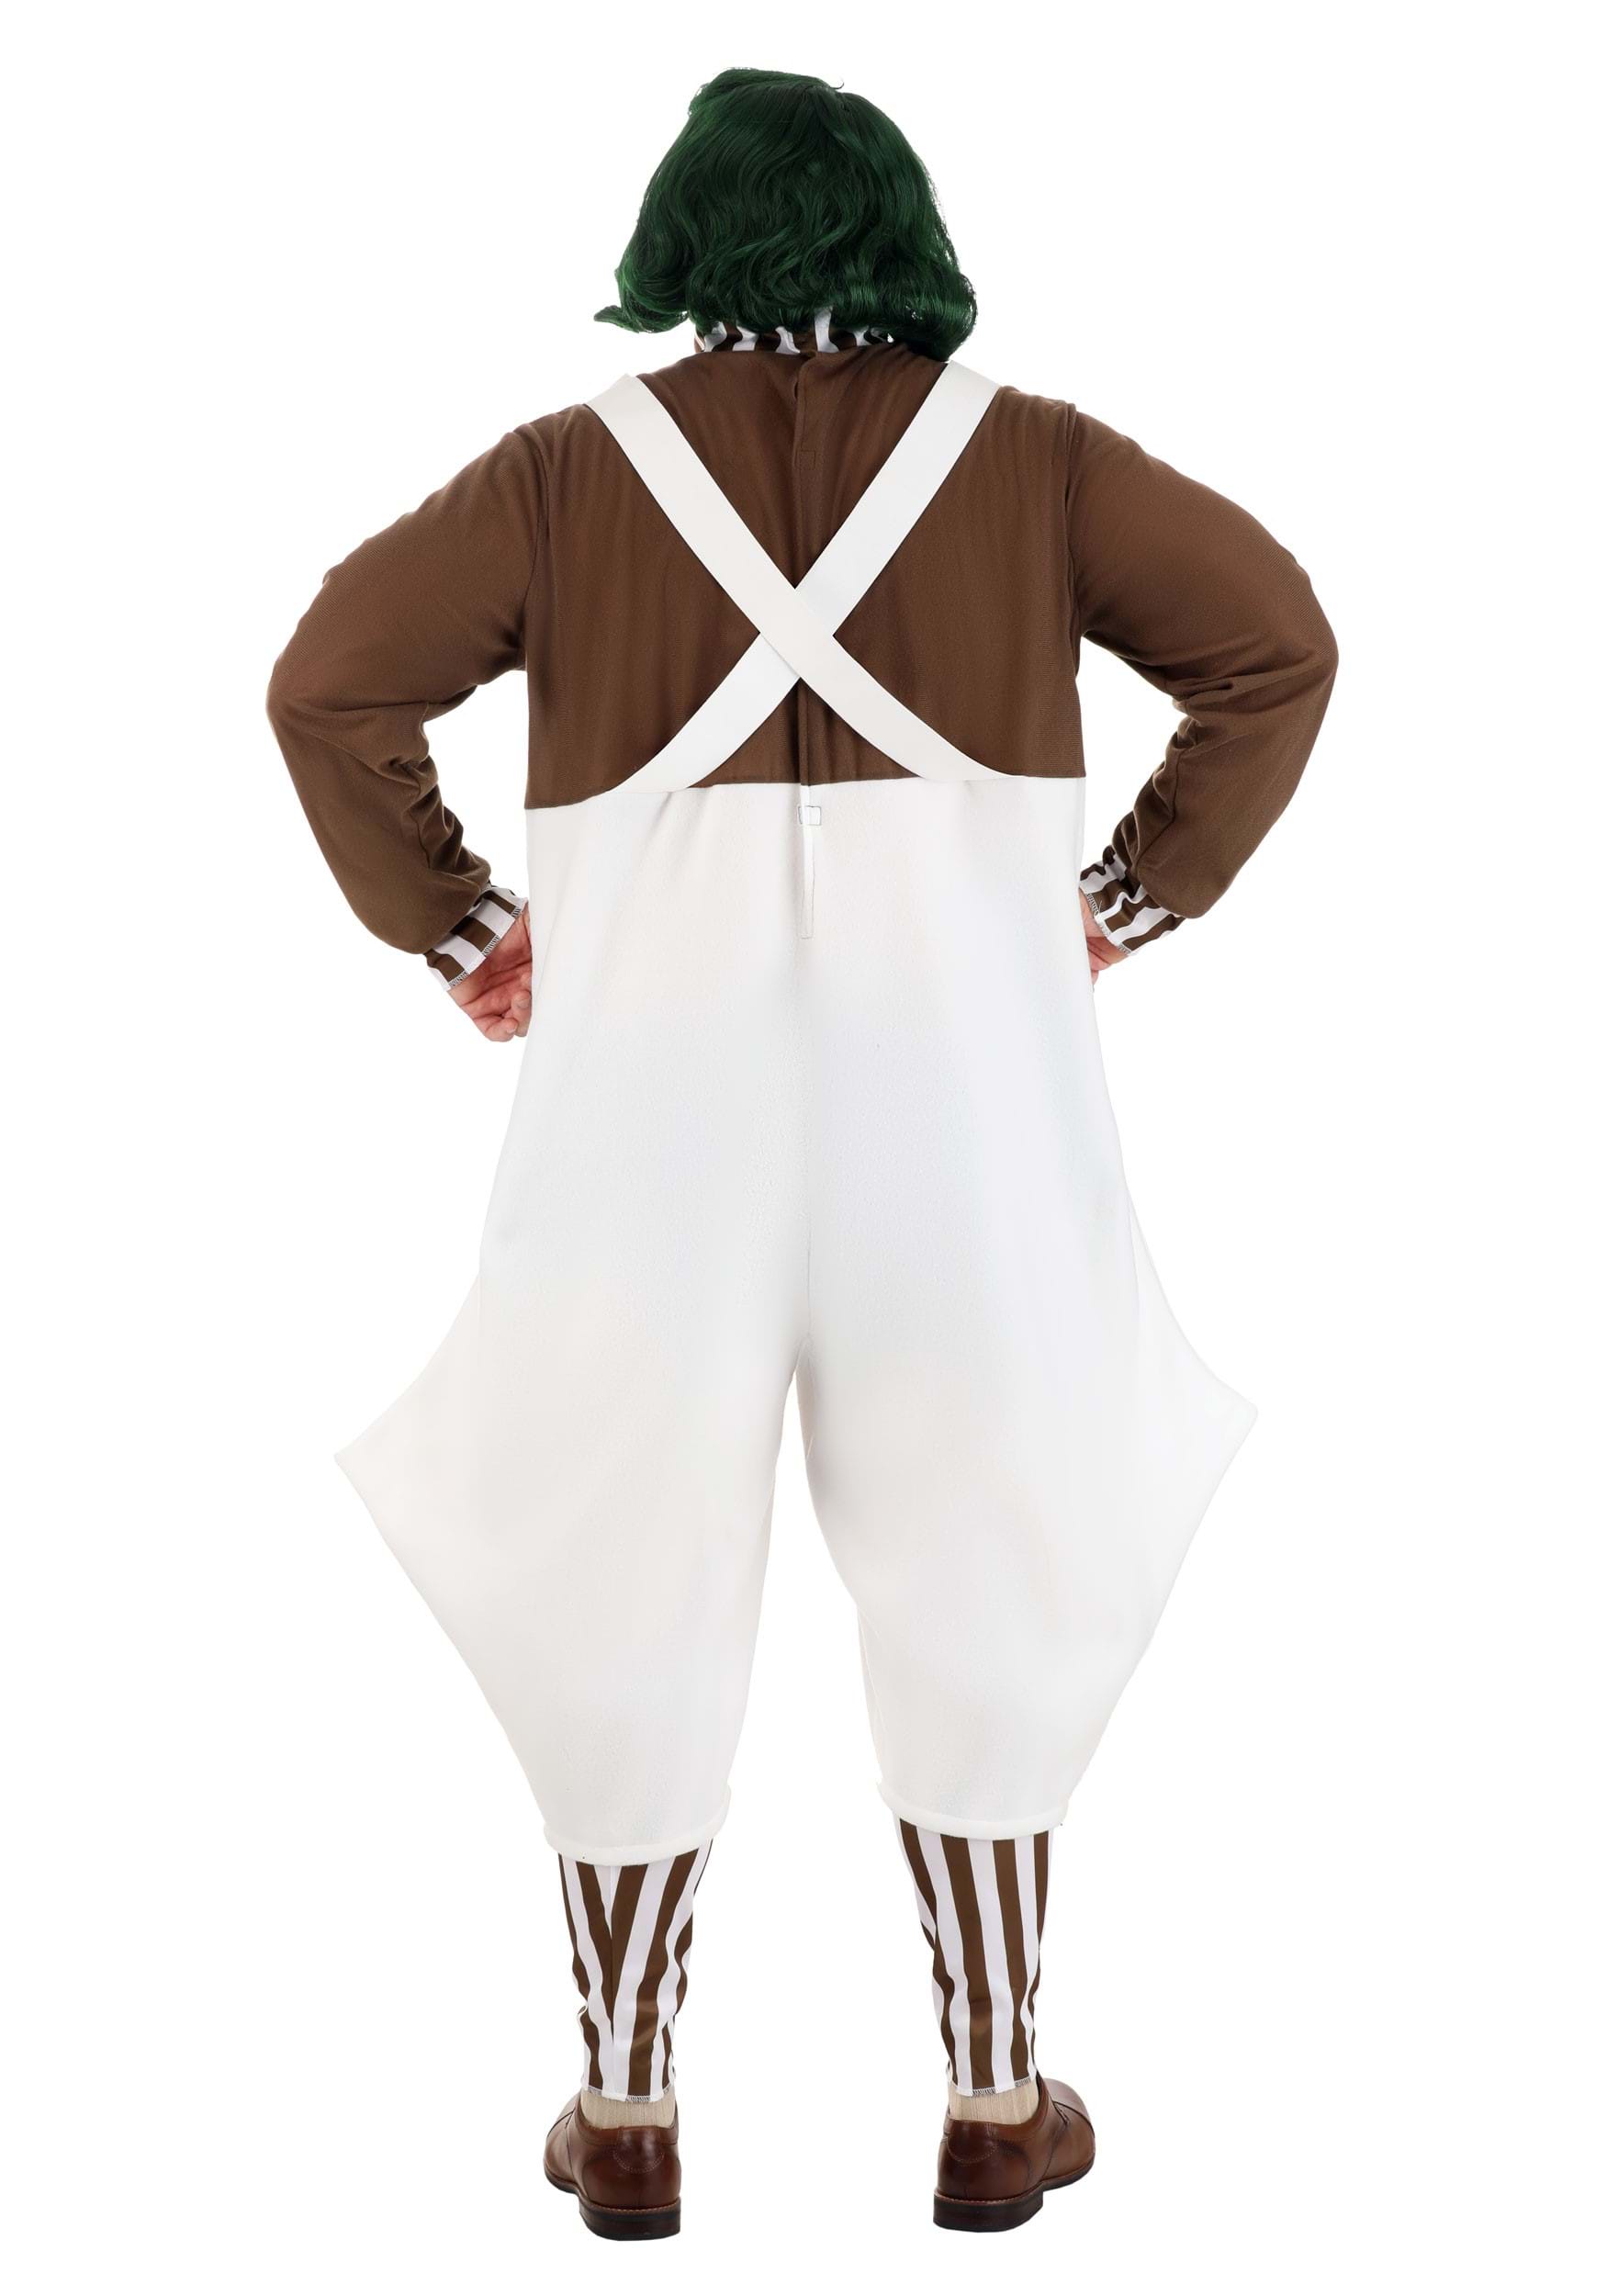 Plus Size Willy Wonka Adult's Oompa Loompa Fancy Dress Costume